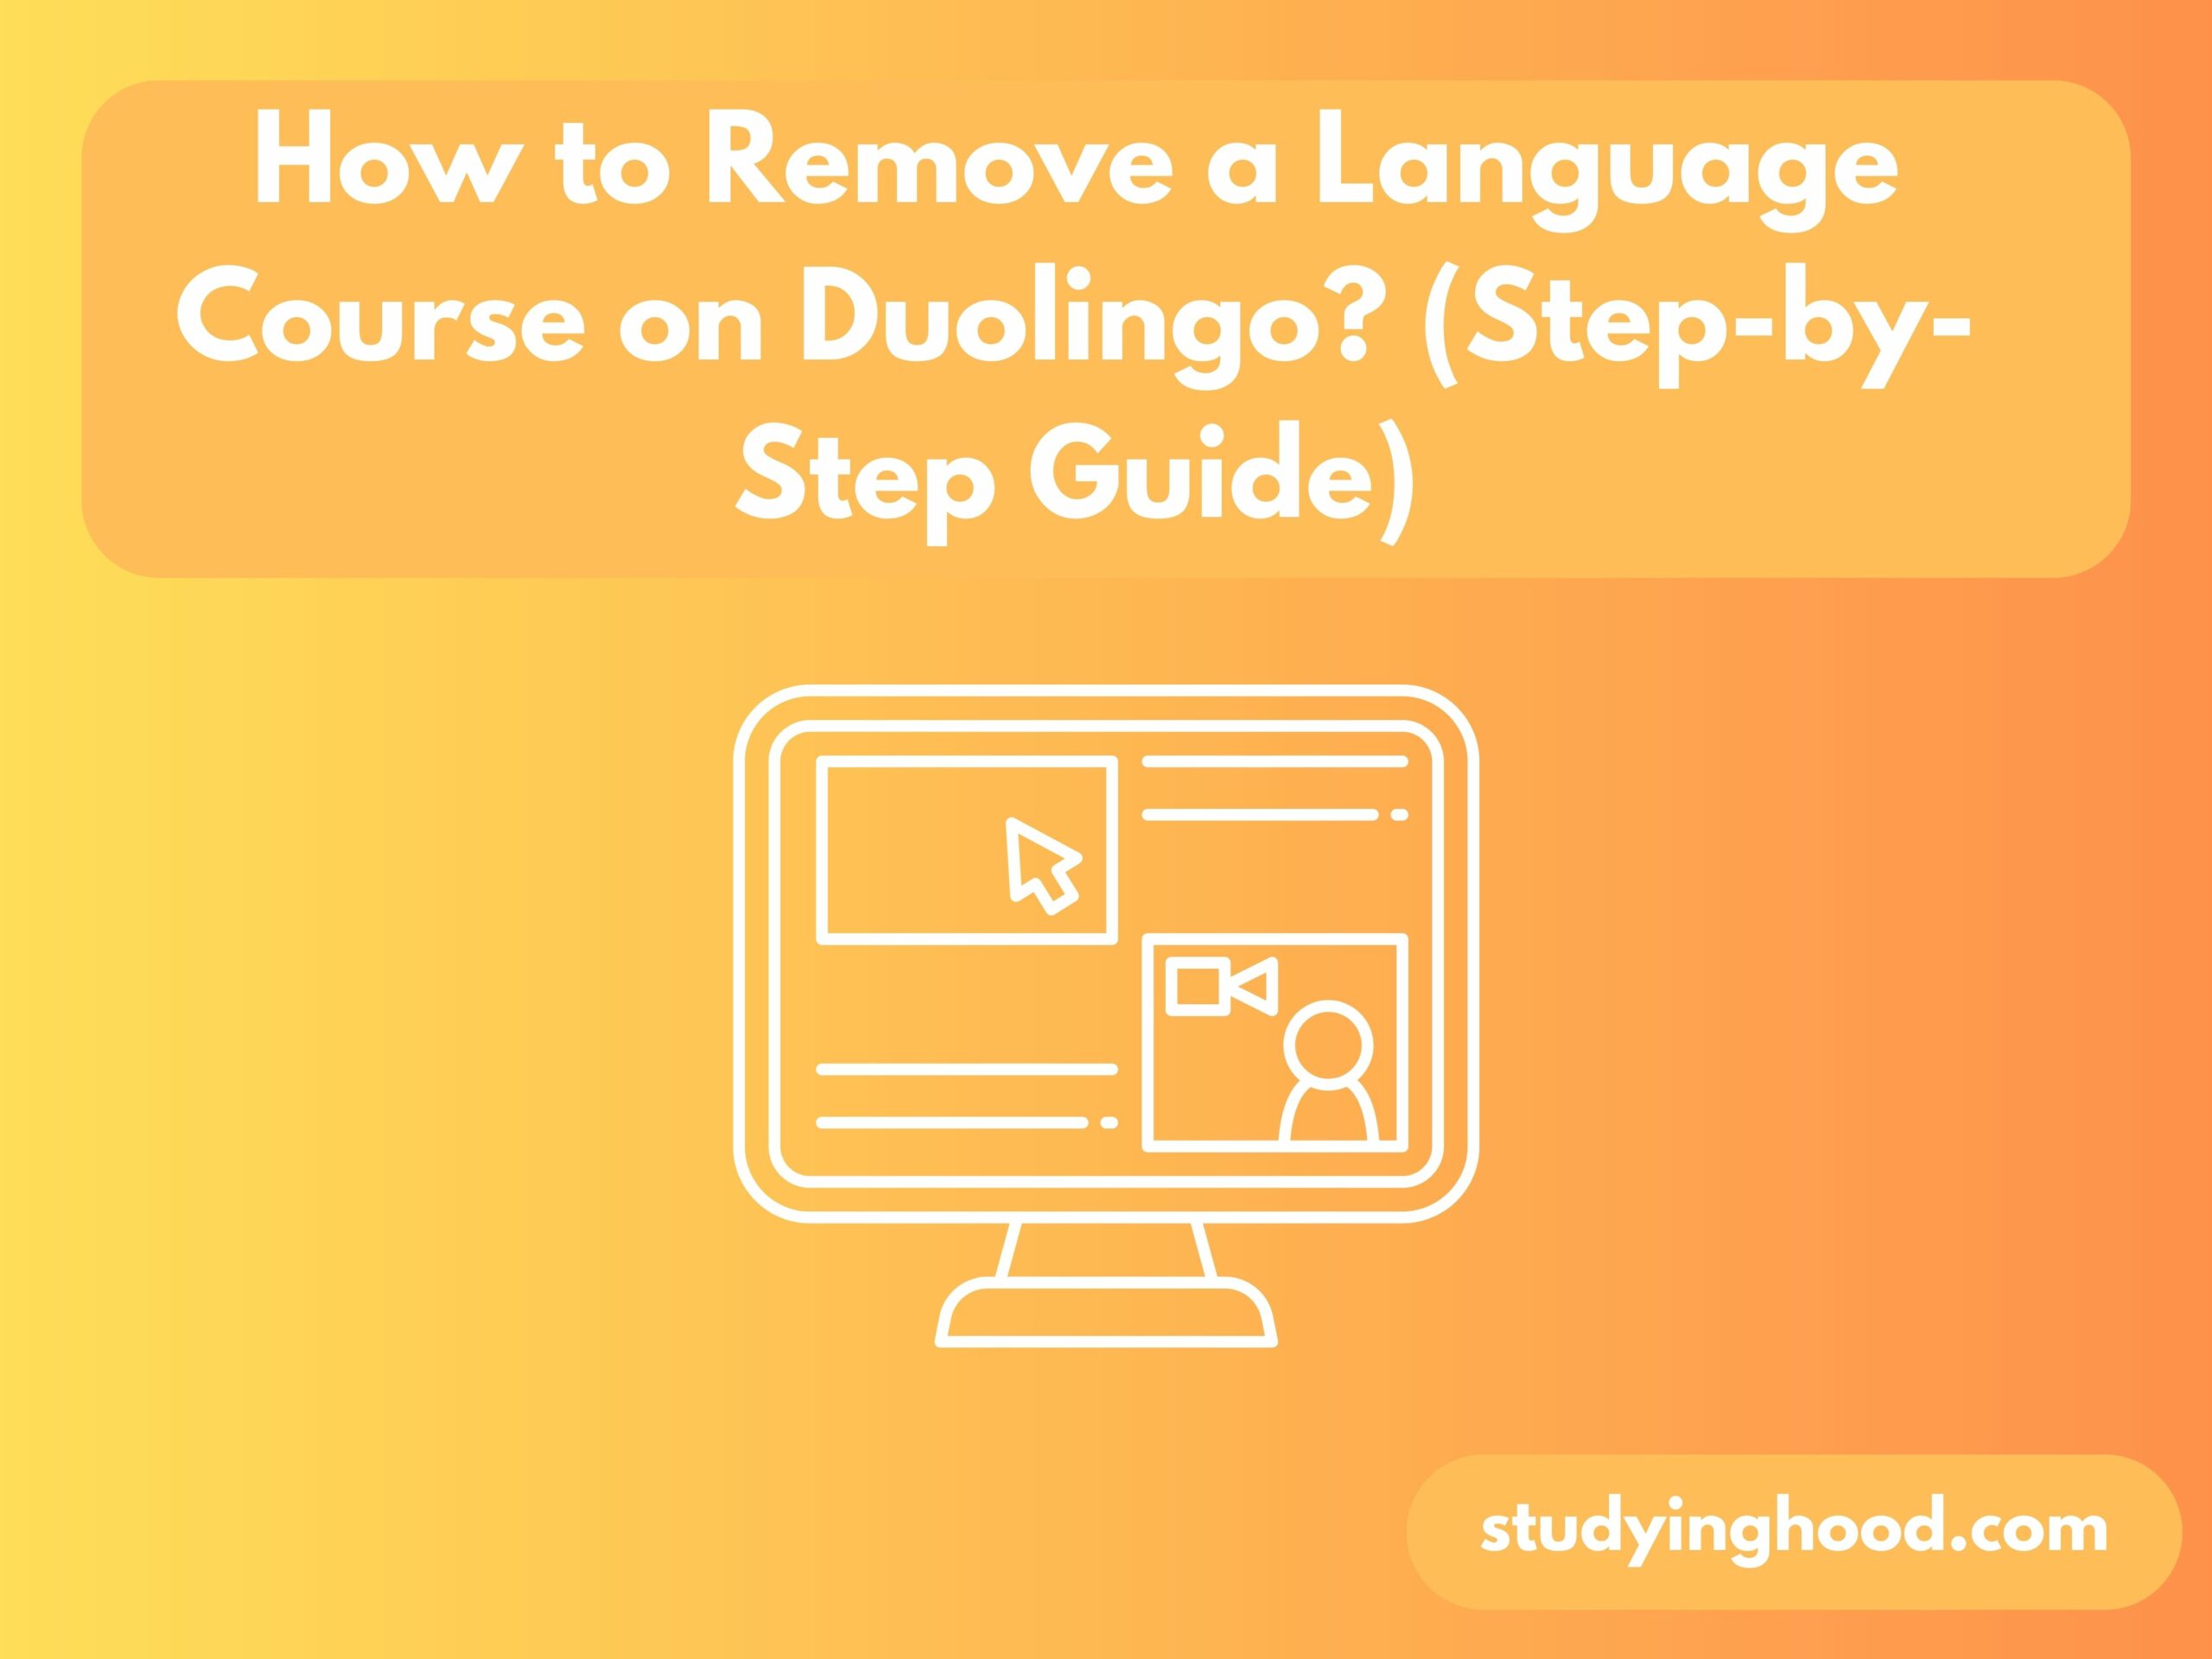 How to Remove a Language Course on Duolingo (Step-by-Step Guide)